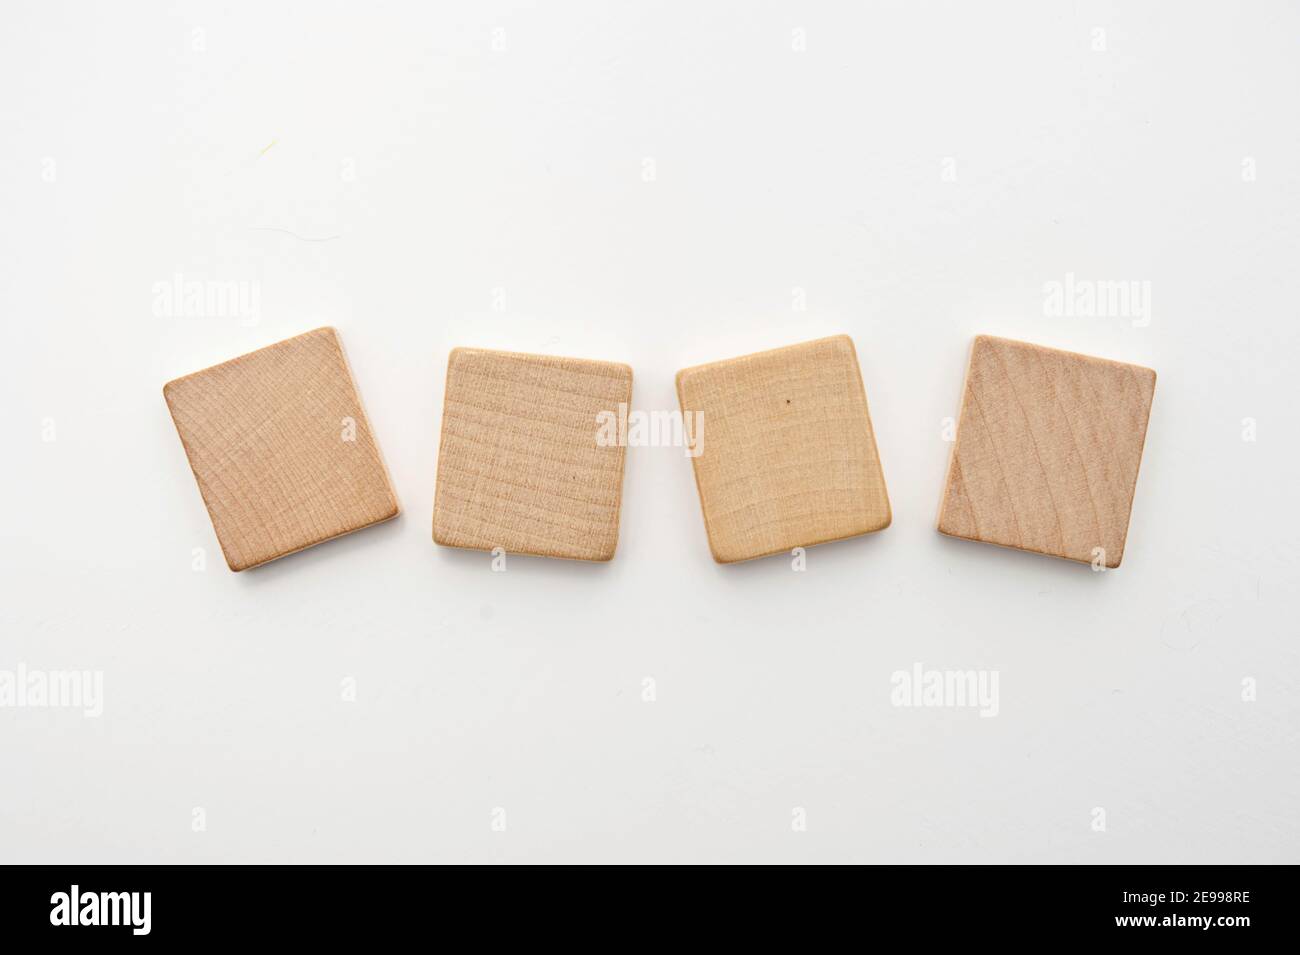 fours blank wooden tiles isolated Stock Photo